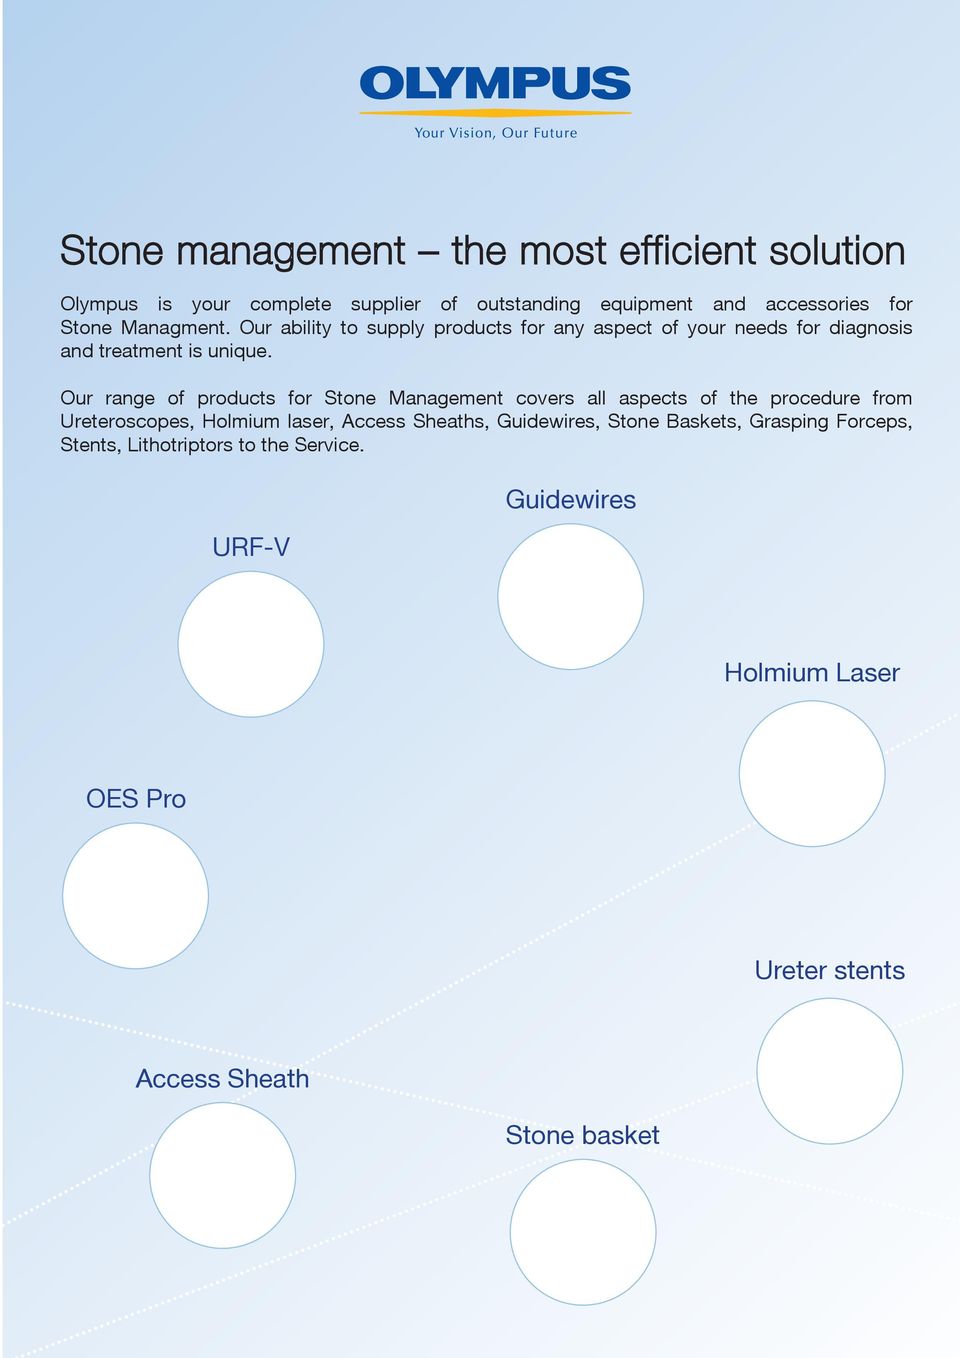 Our range of products for Stone Management covers all aspects of the procedure from Ureteroscopes, Holmium laser, Access